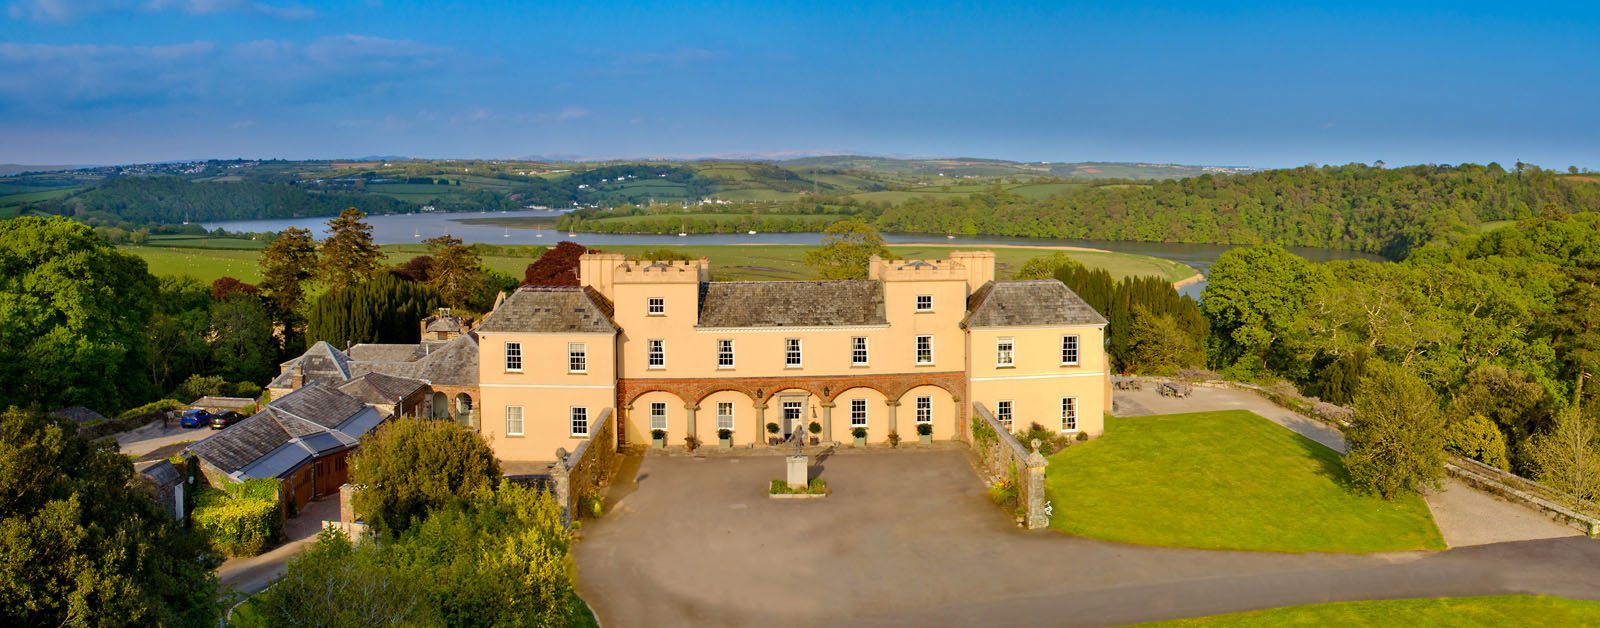  River View Castle - kate & tom's Large Holiday Homes